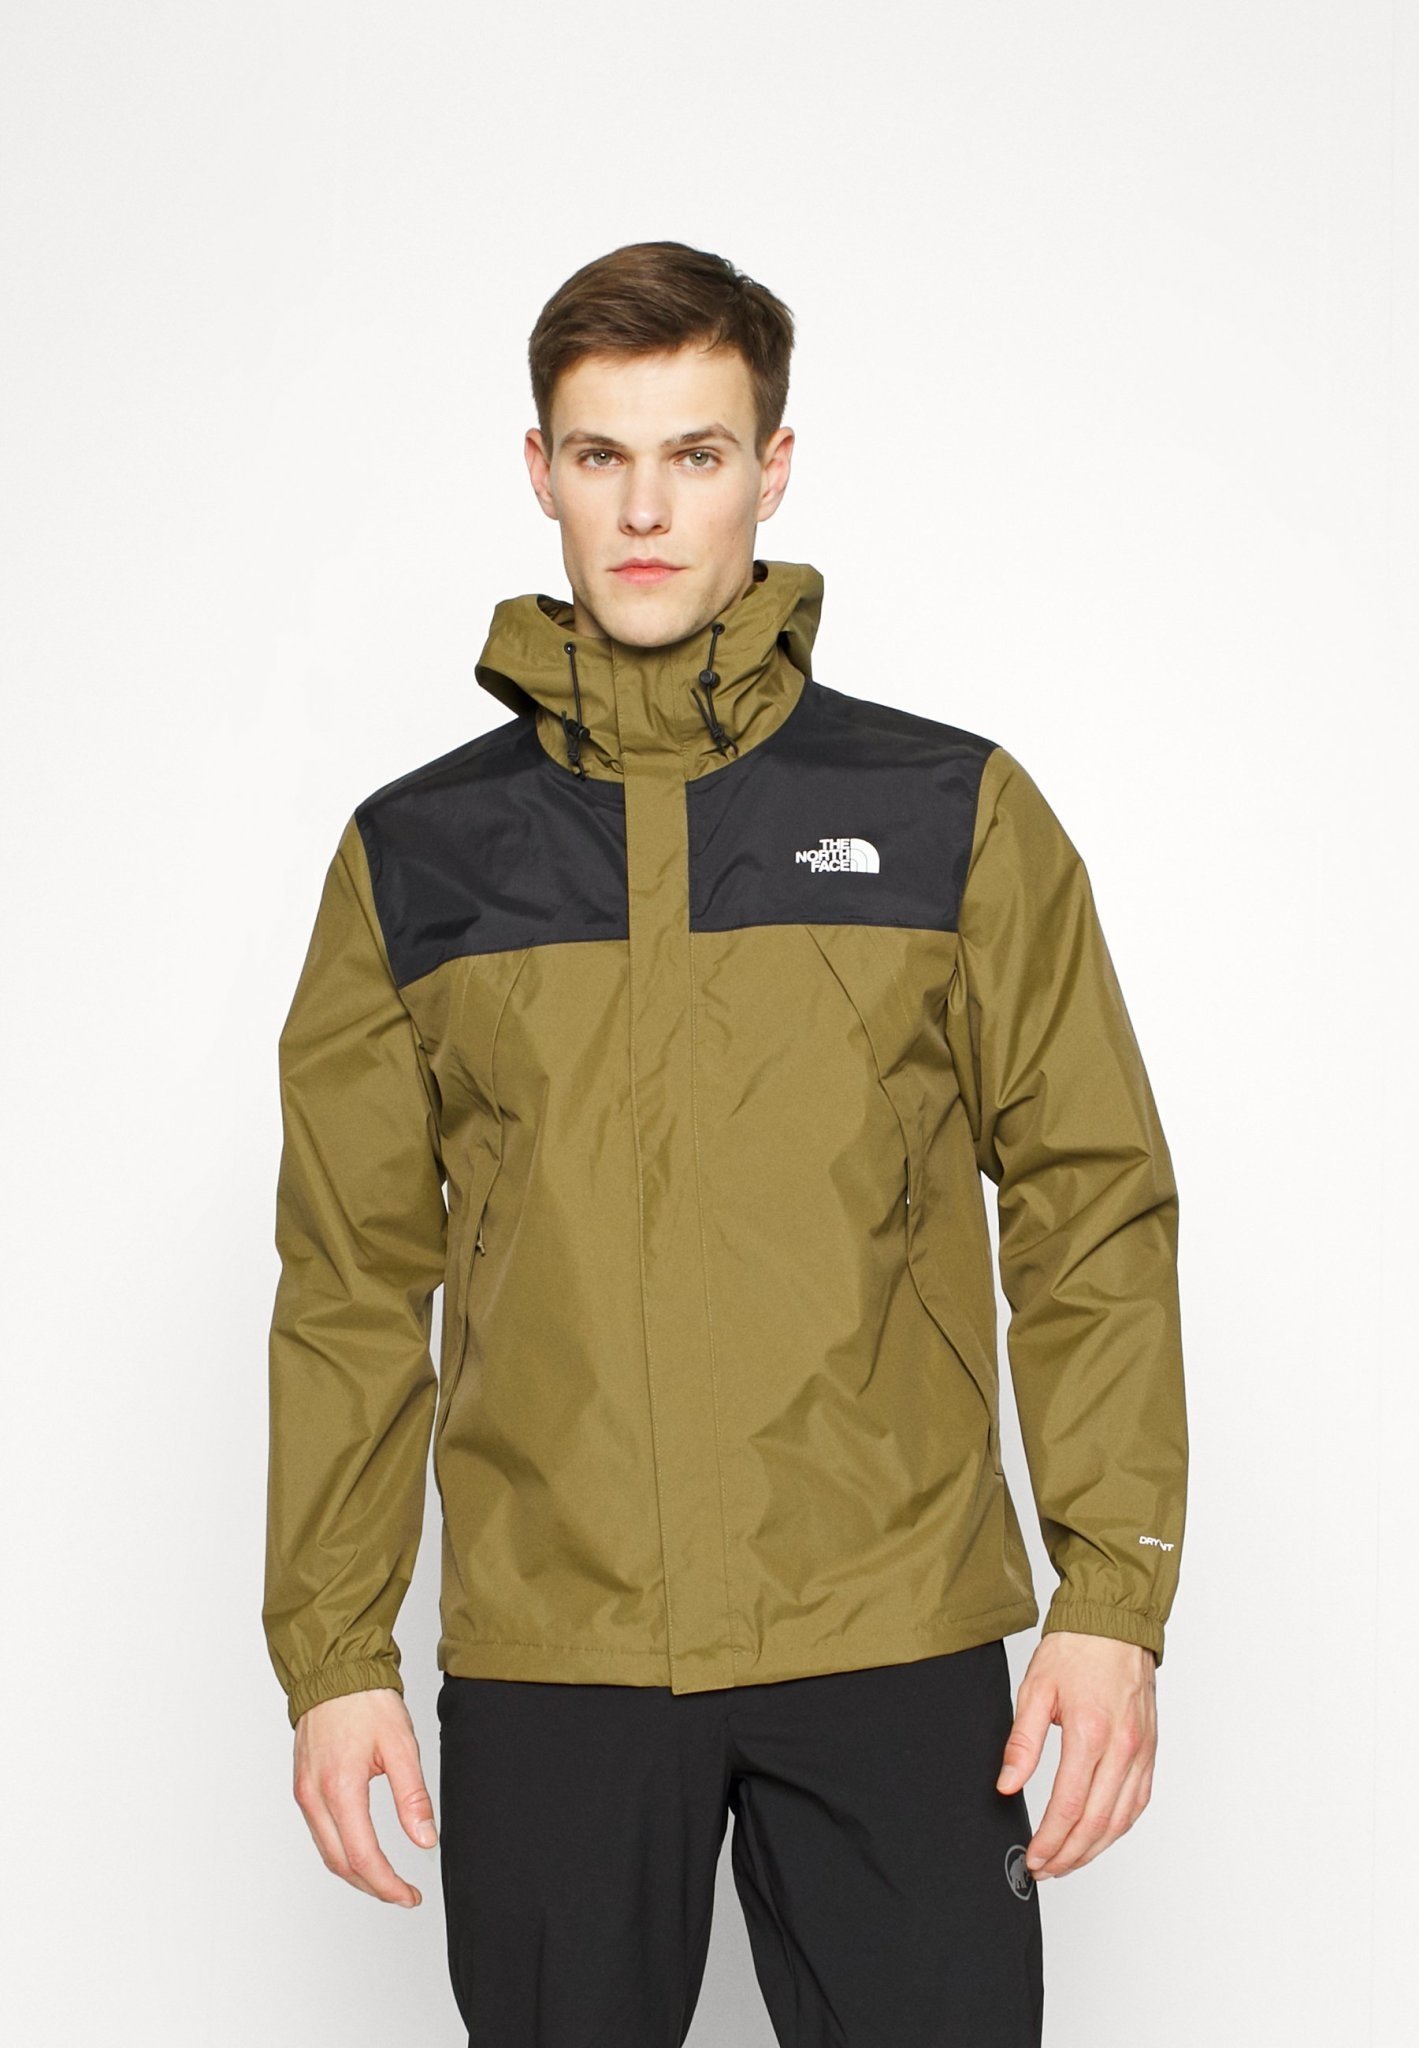 North Face Men's Antora Jacket - Great Lakes Outfitters